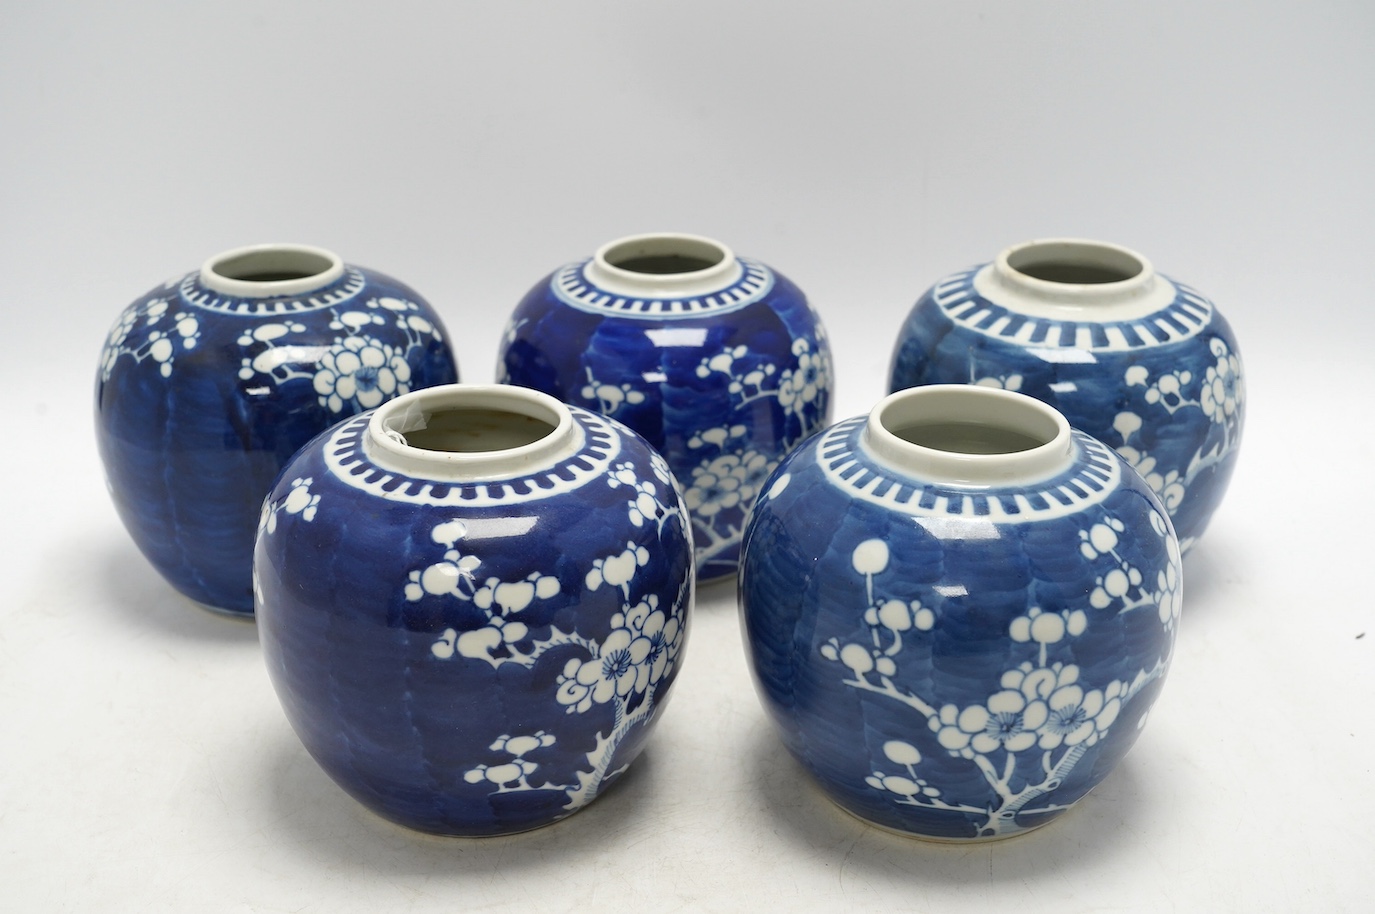 Five Chinese blue and white prunus jars, without covers, early 20th century, tallest 13cm high. Condition - one jar is chipped around the top, another has a large firing fault, the other two good